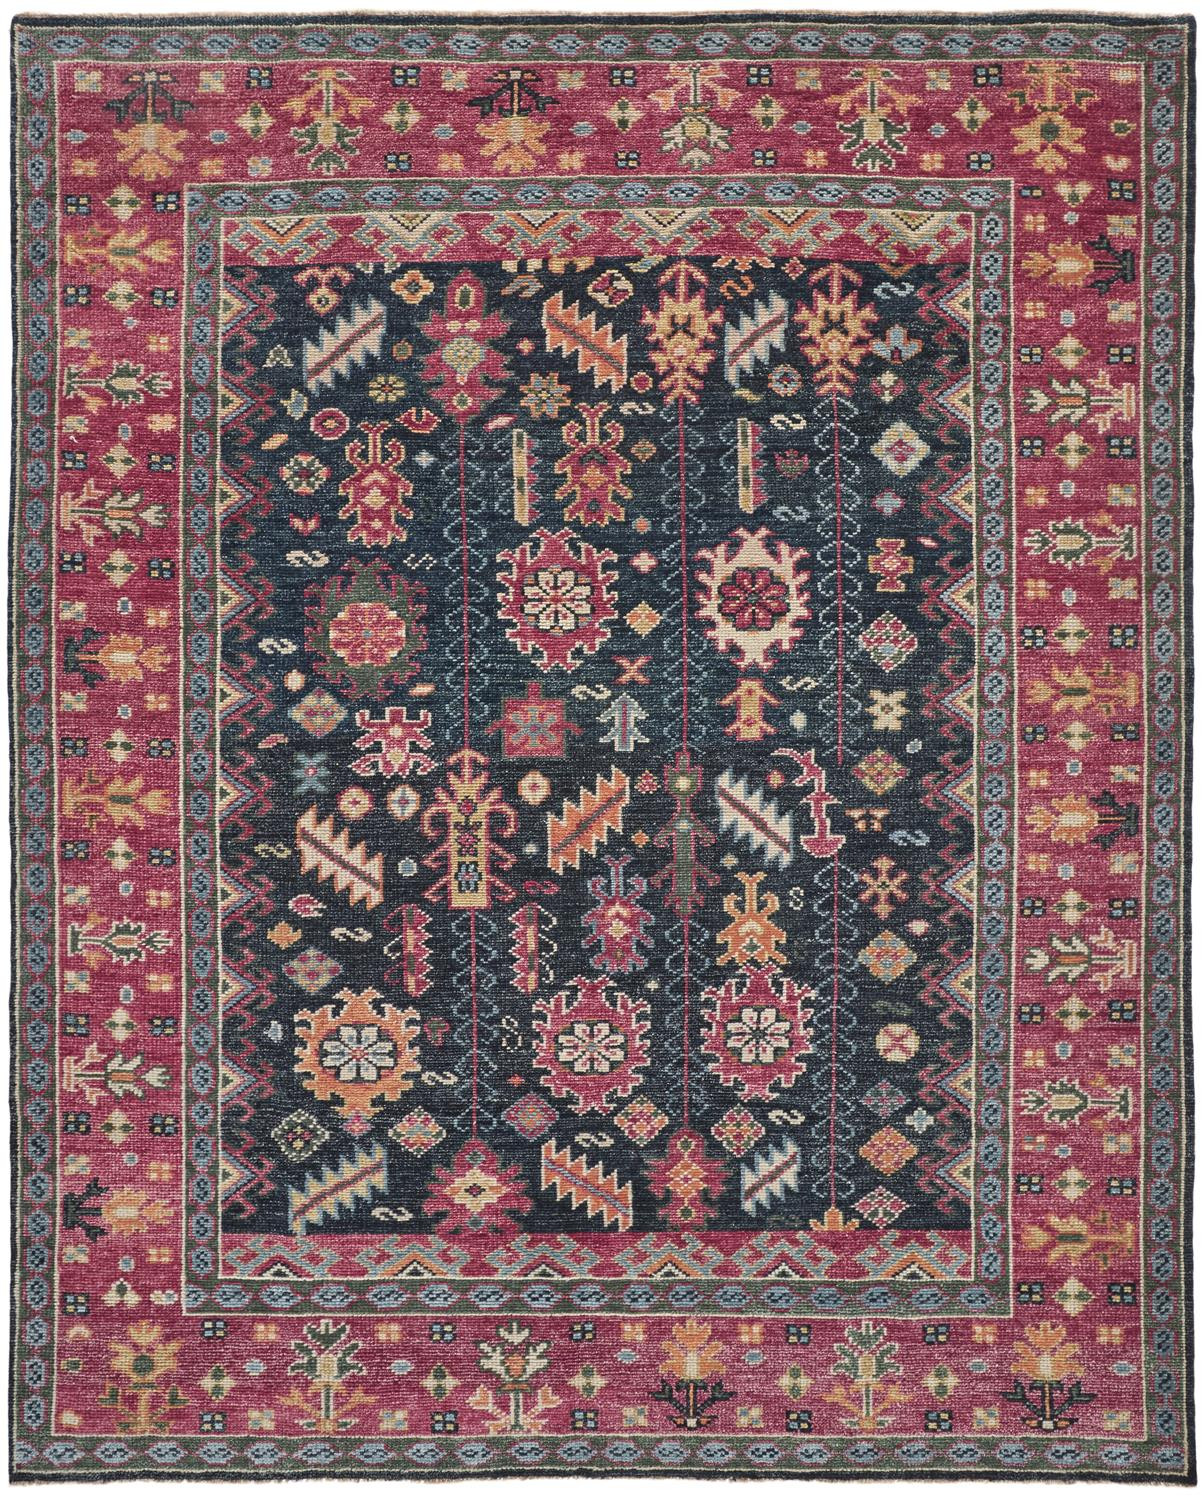 2' X 3' Pink Blue And Orange Wool Floral Hand Knotted Distressed Stain Resistant Area Rug With Fringe-511649-1